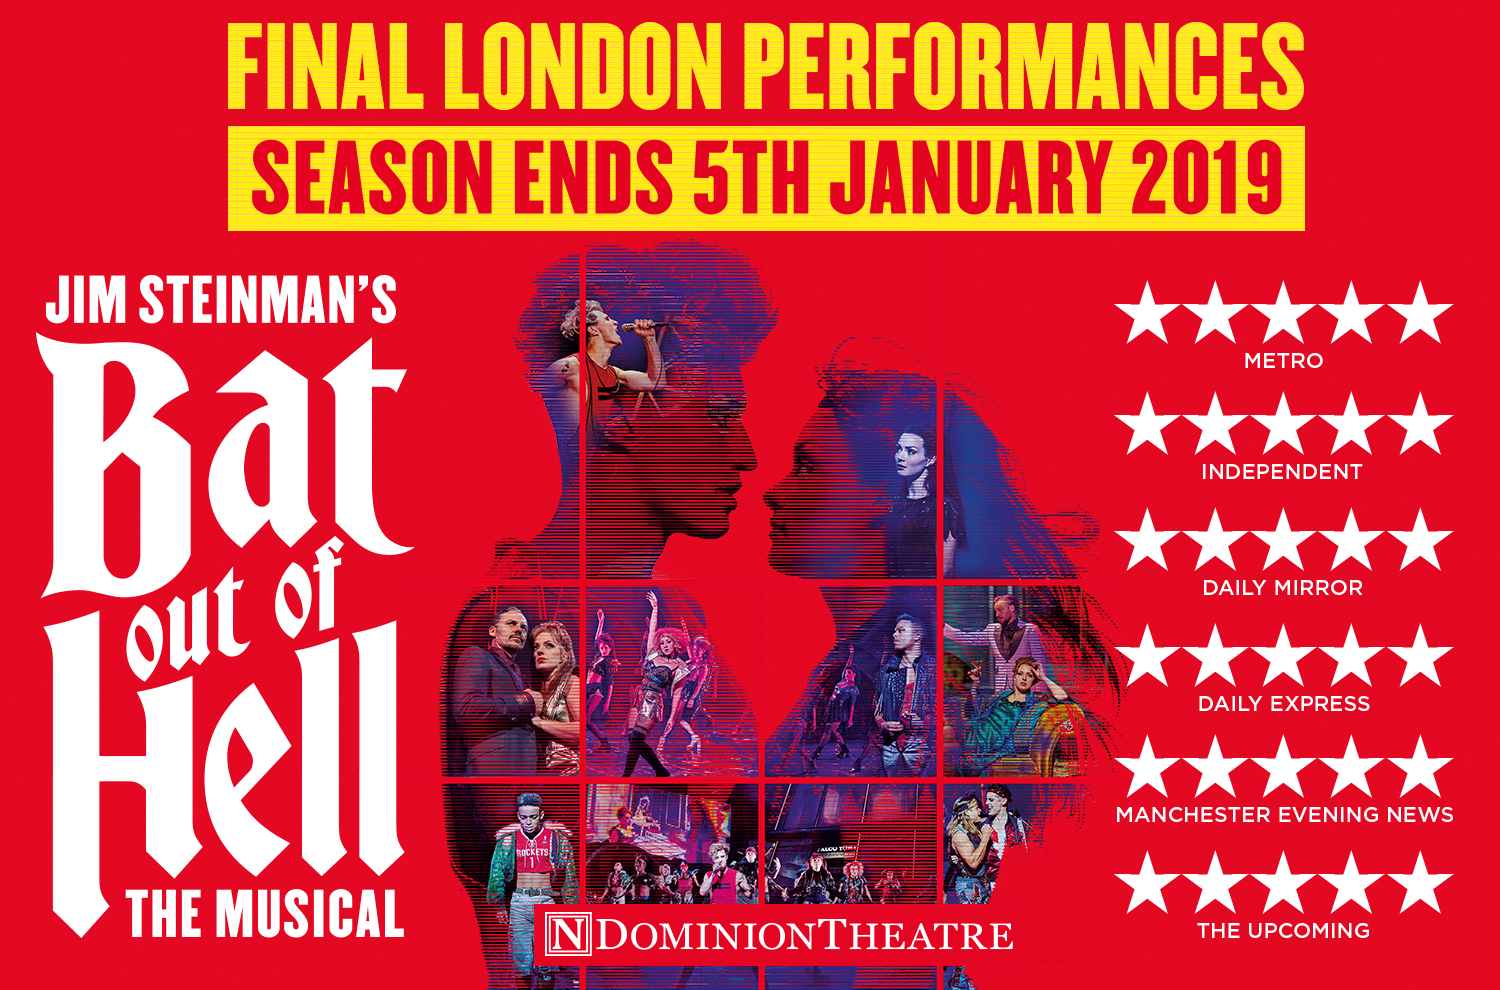 Jim Steinman's Bat Out Of Hell The Musical at the Dominion Theatre, London until 5th January 2019